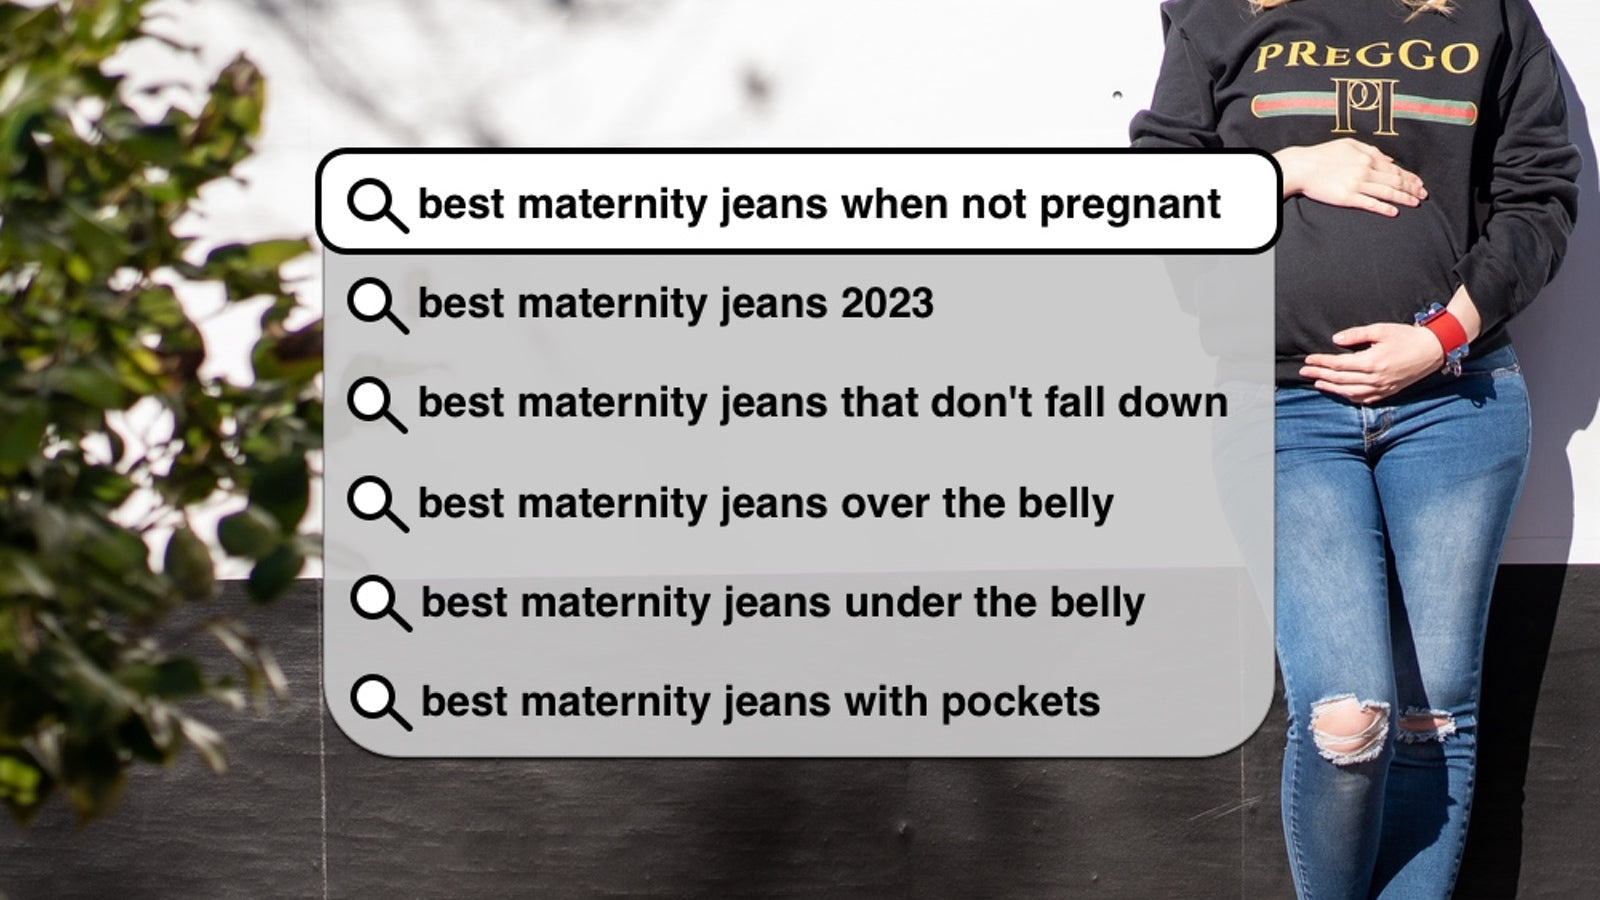 Maternity jeans when not pregnant